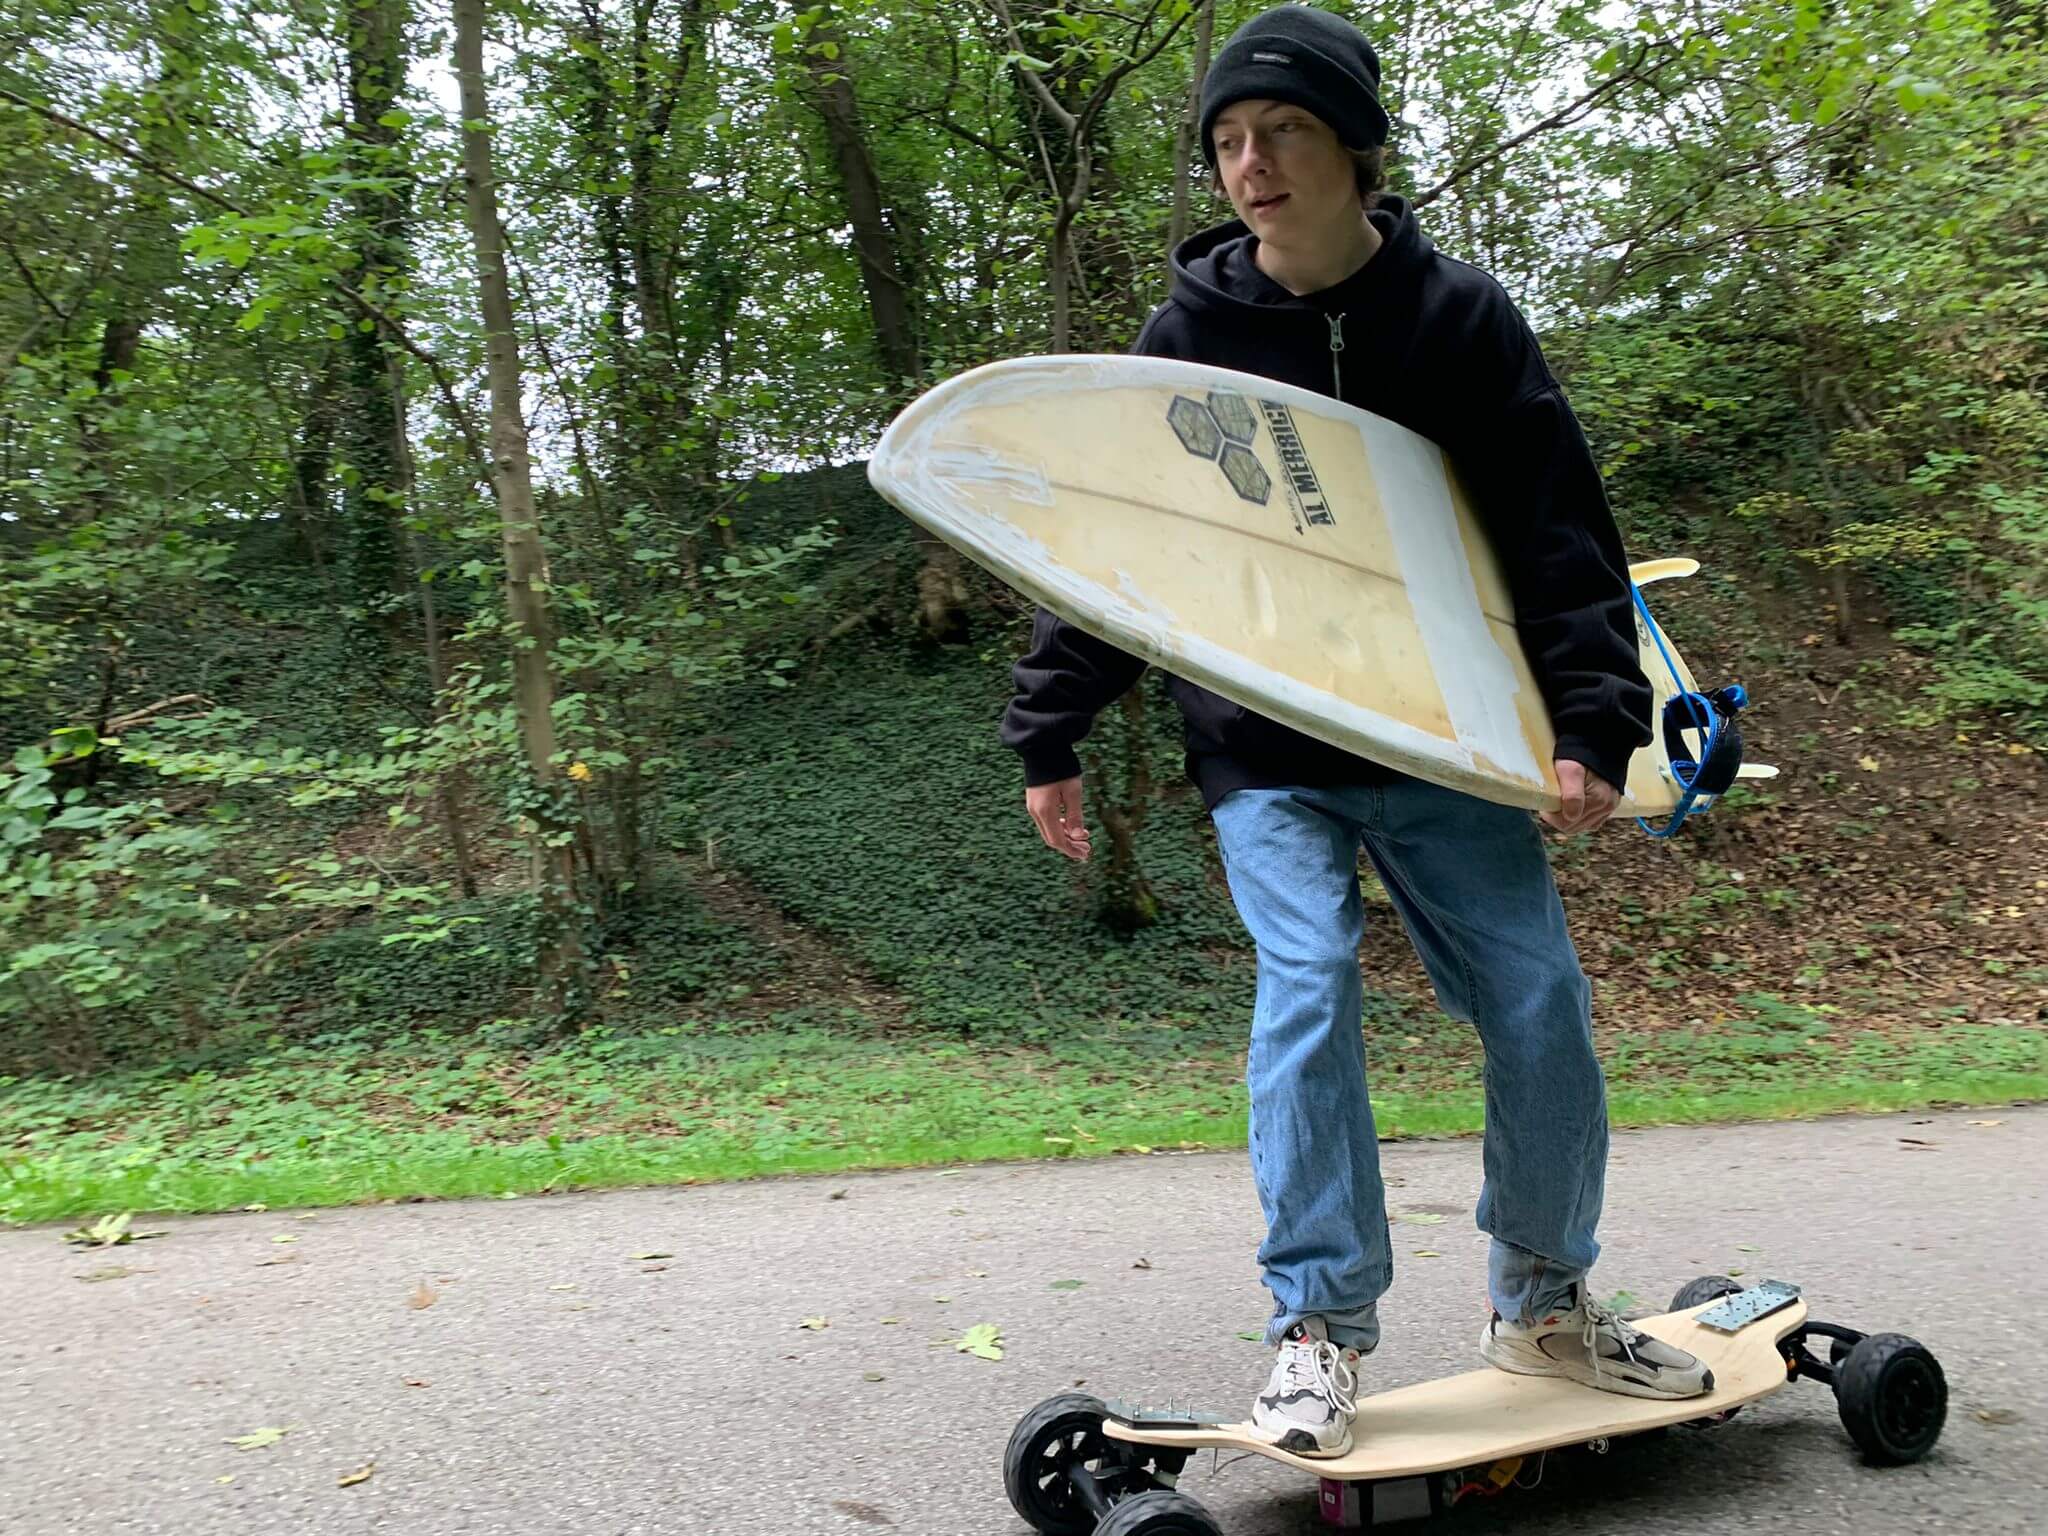 A student riding a longboard